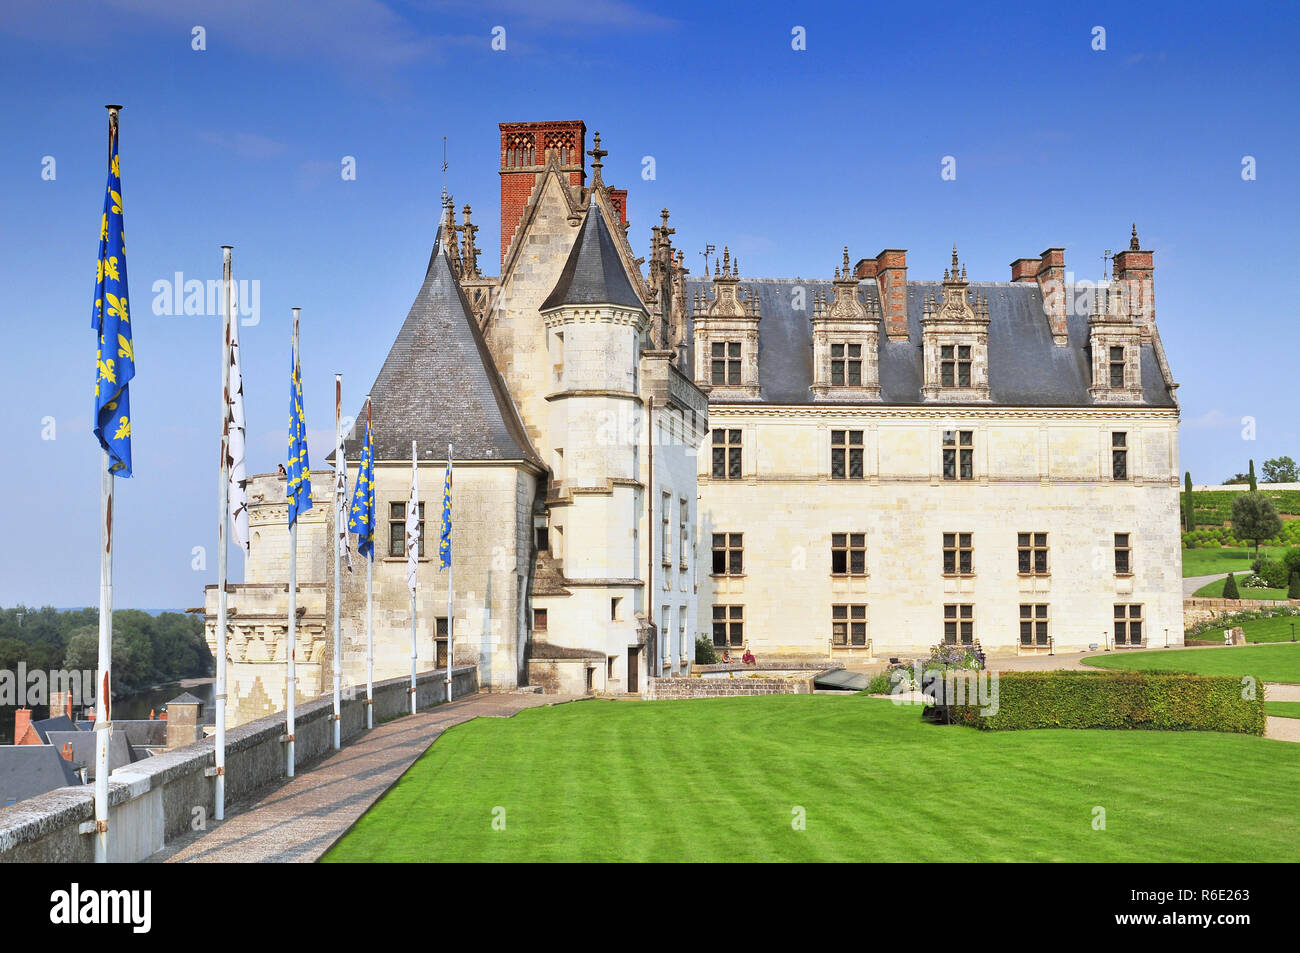 Chateau D`Amboise France This Royal Castle Is Located In Amboise In The Loire Valley Was Built In The 15Th Century And Is A Tourist Attraction, France Stock Photo